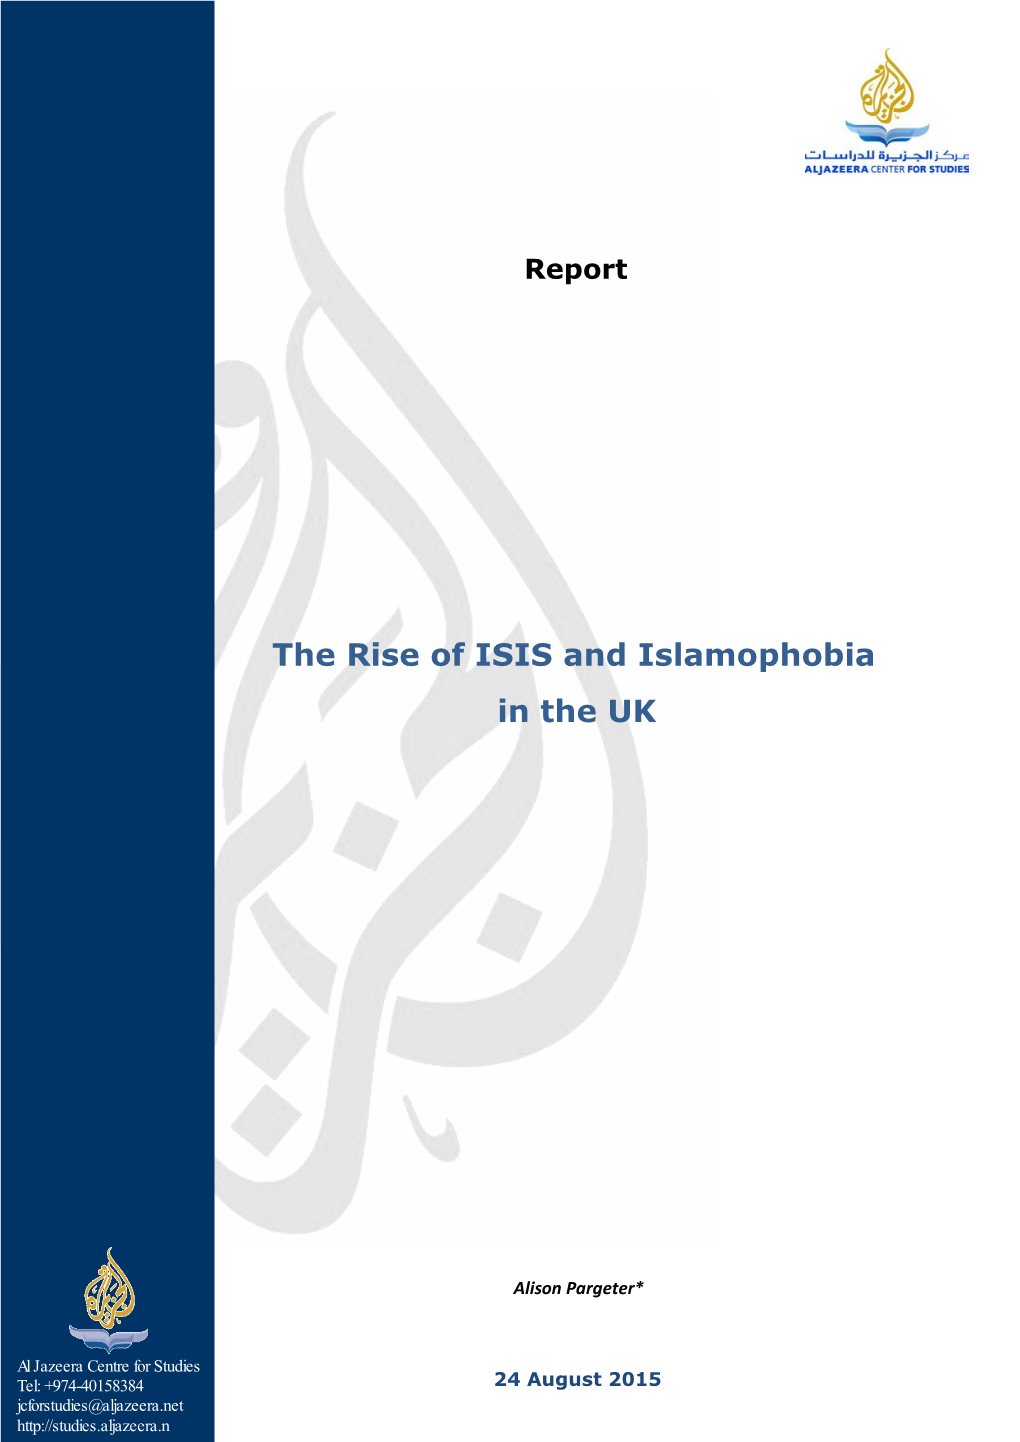 The Rise of ISIS and Islamophobia in the UK